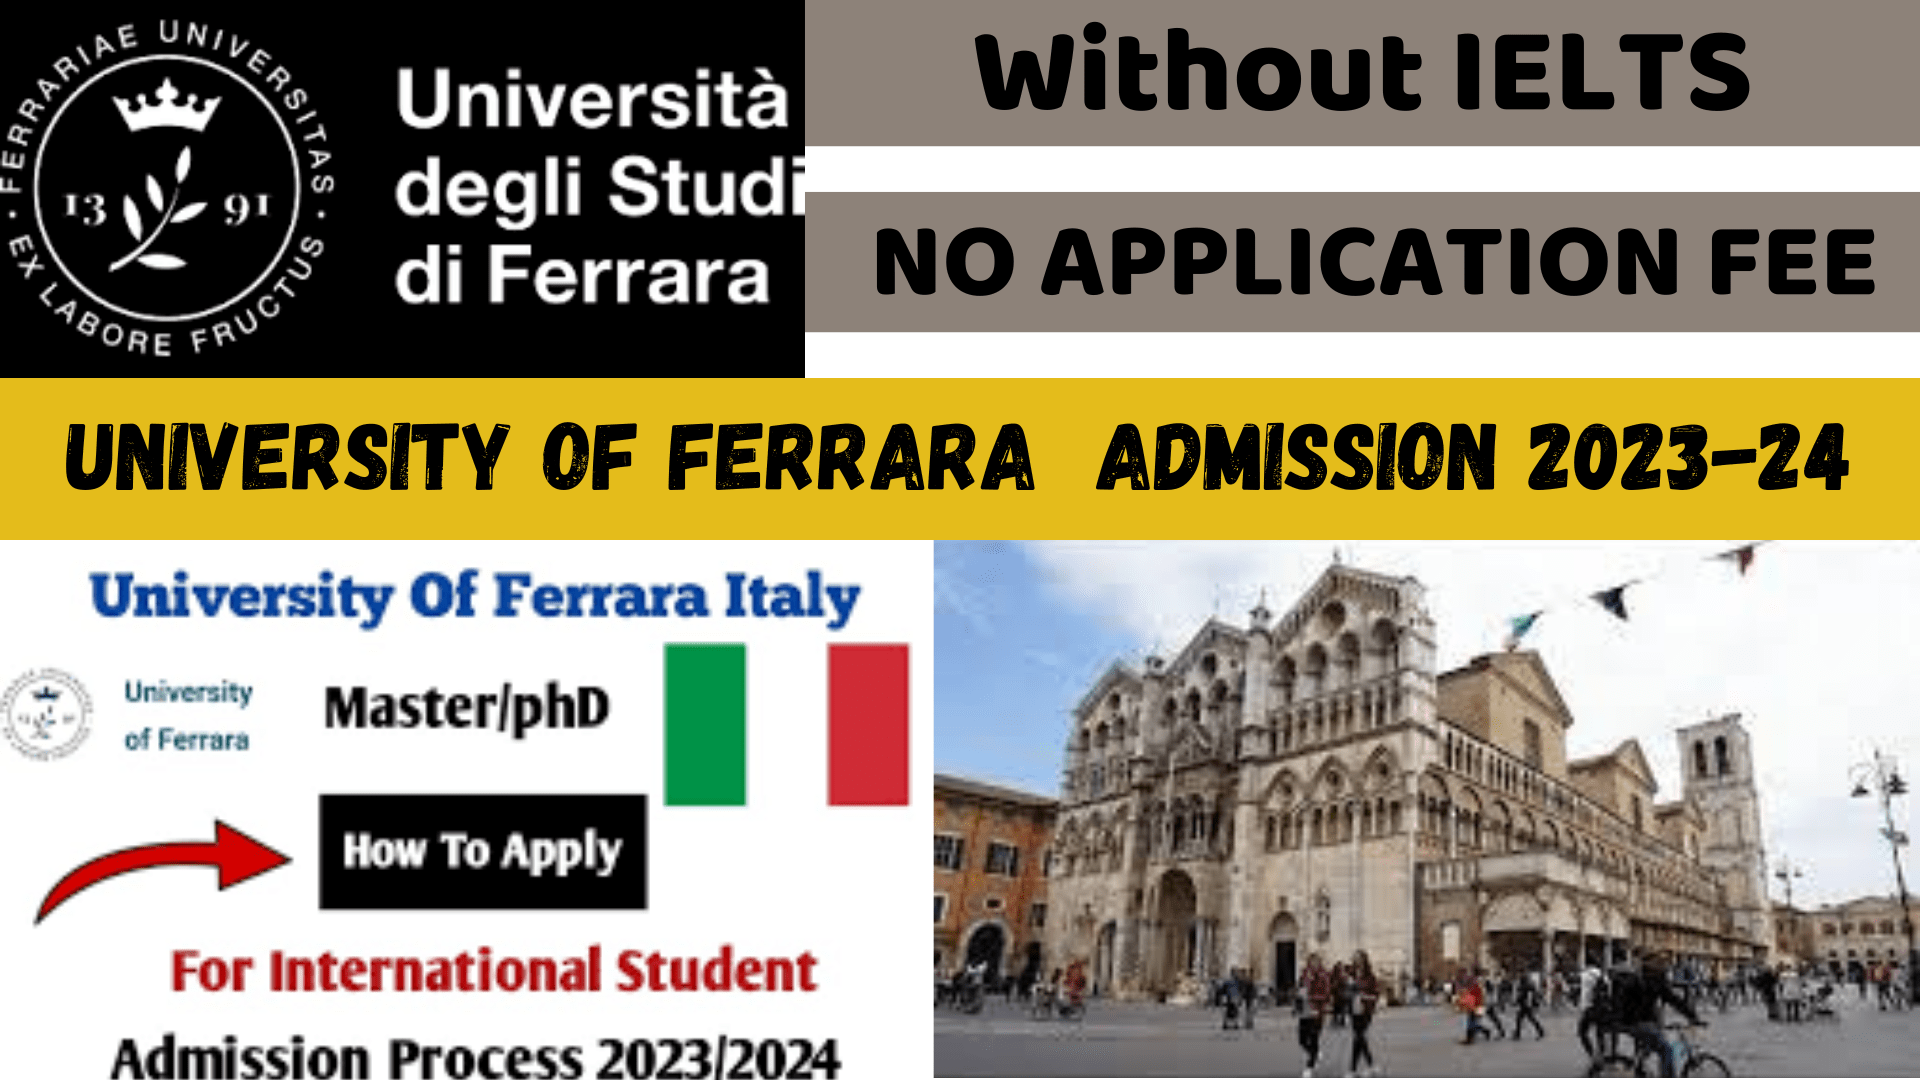 University of Ferrara Apply Online Admission 2023-24 | No Application Fee | Without IELTS